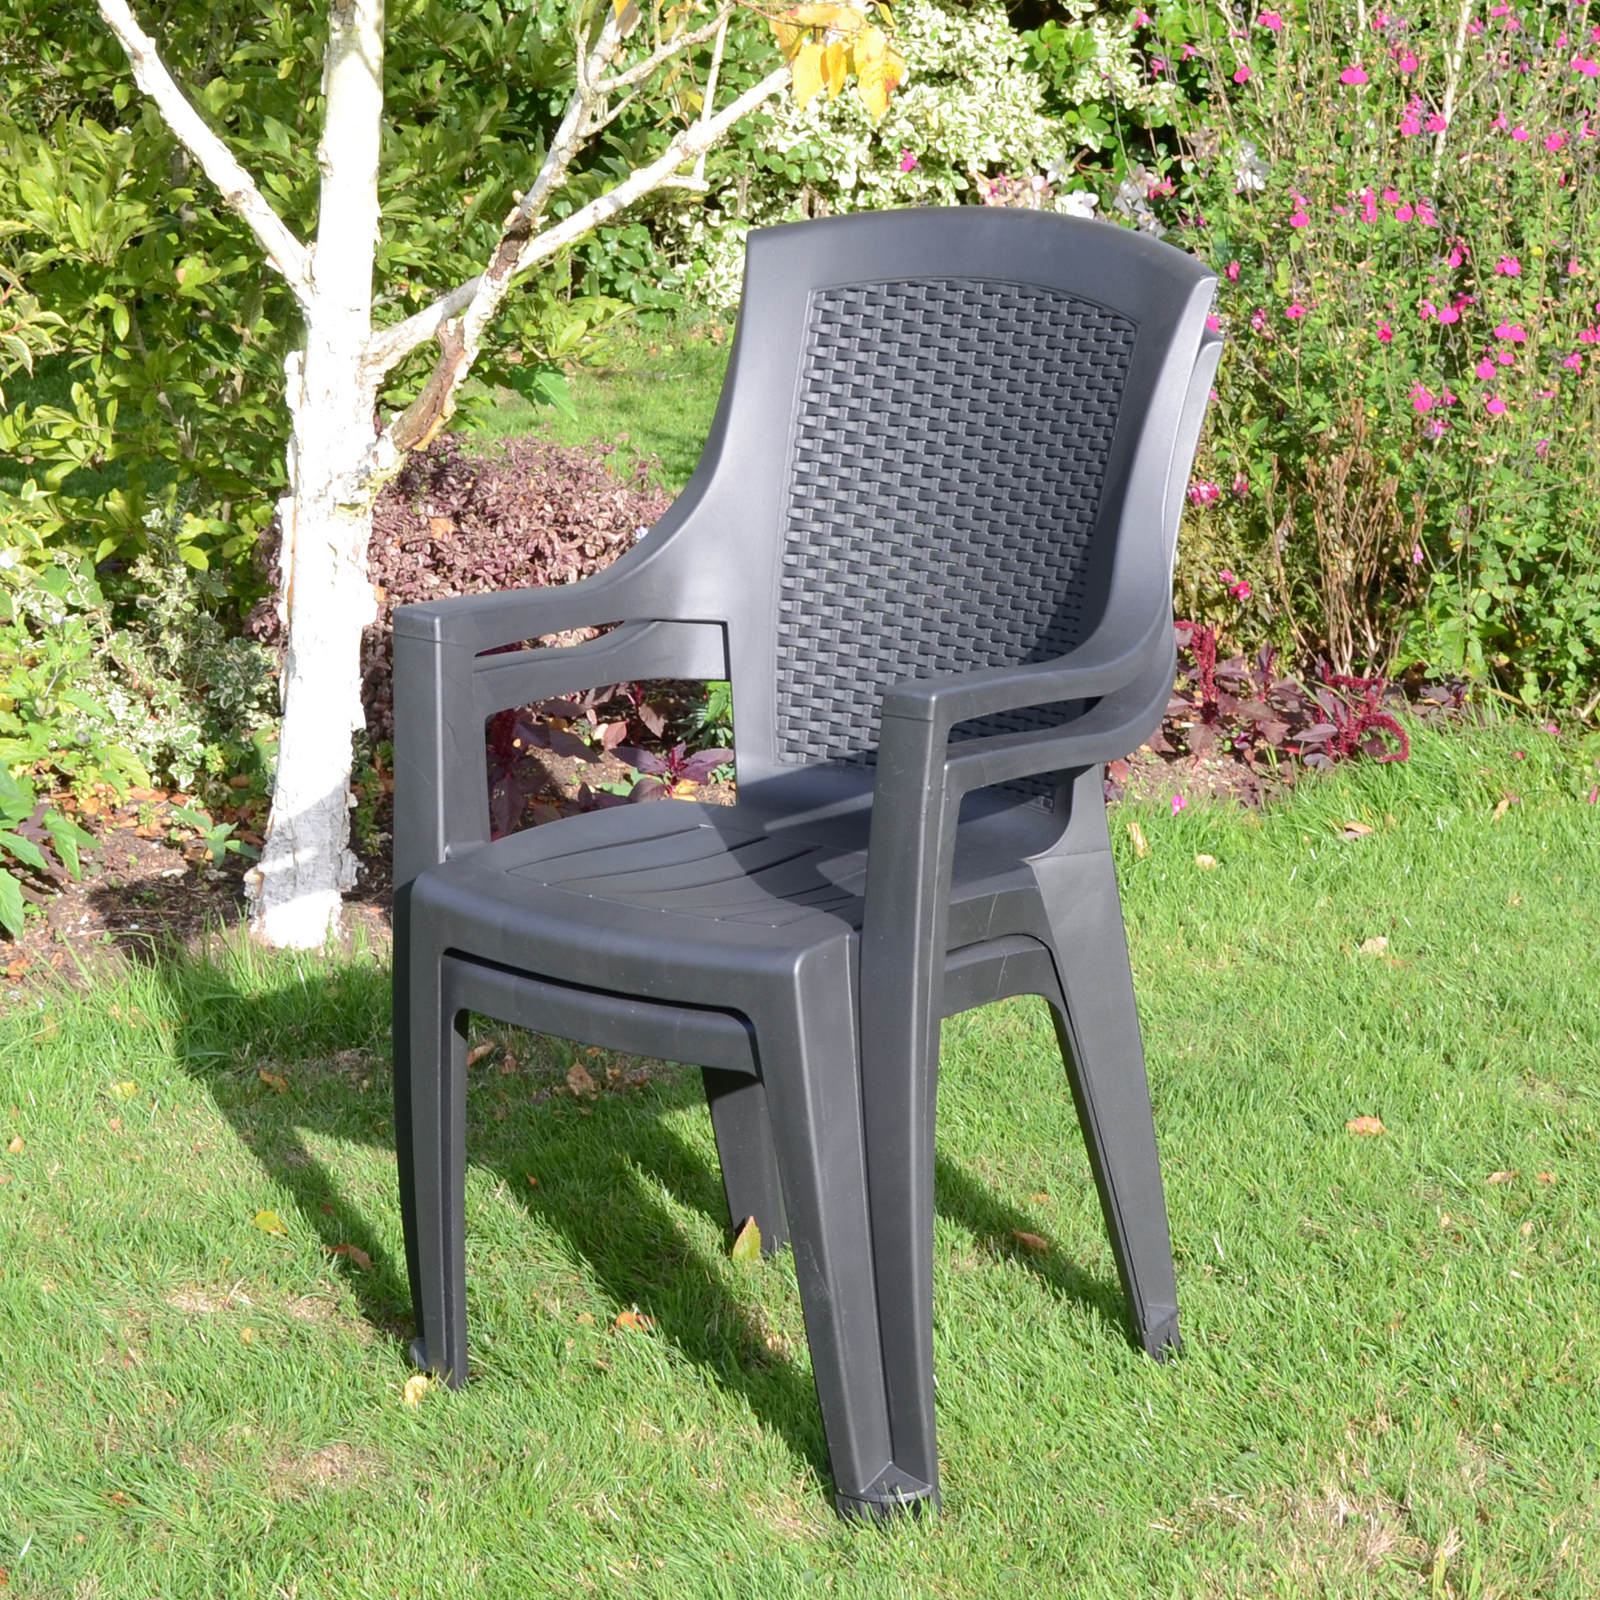 Trabella Sedini Stack Chair Anthracite Grey (Pack of 2) Chairs Trabella   